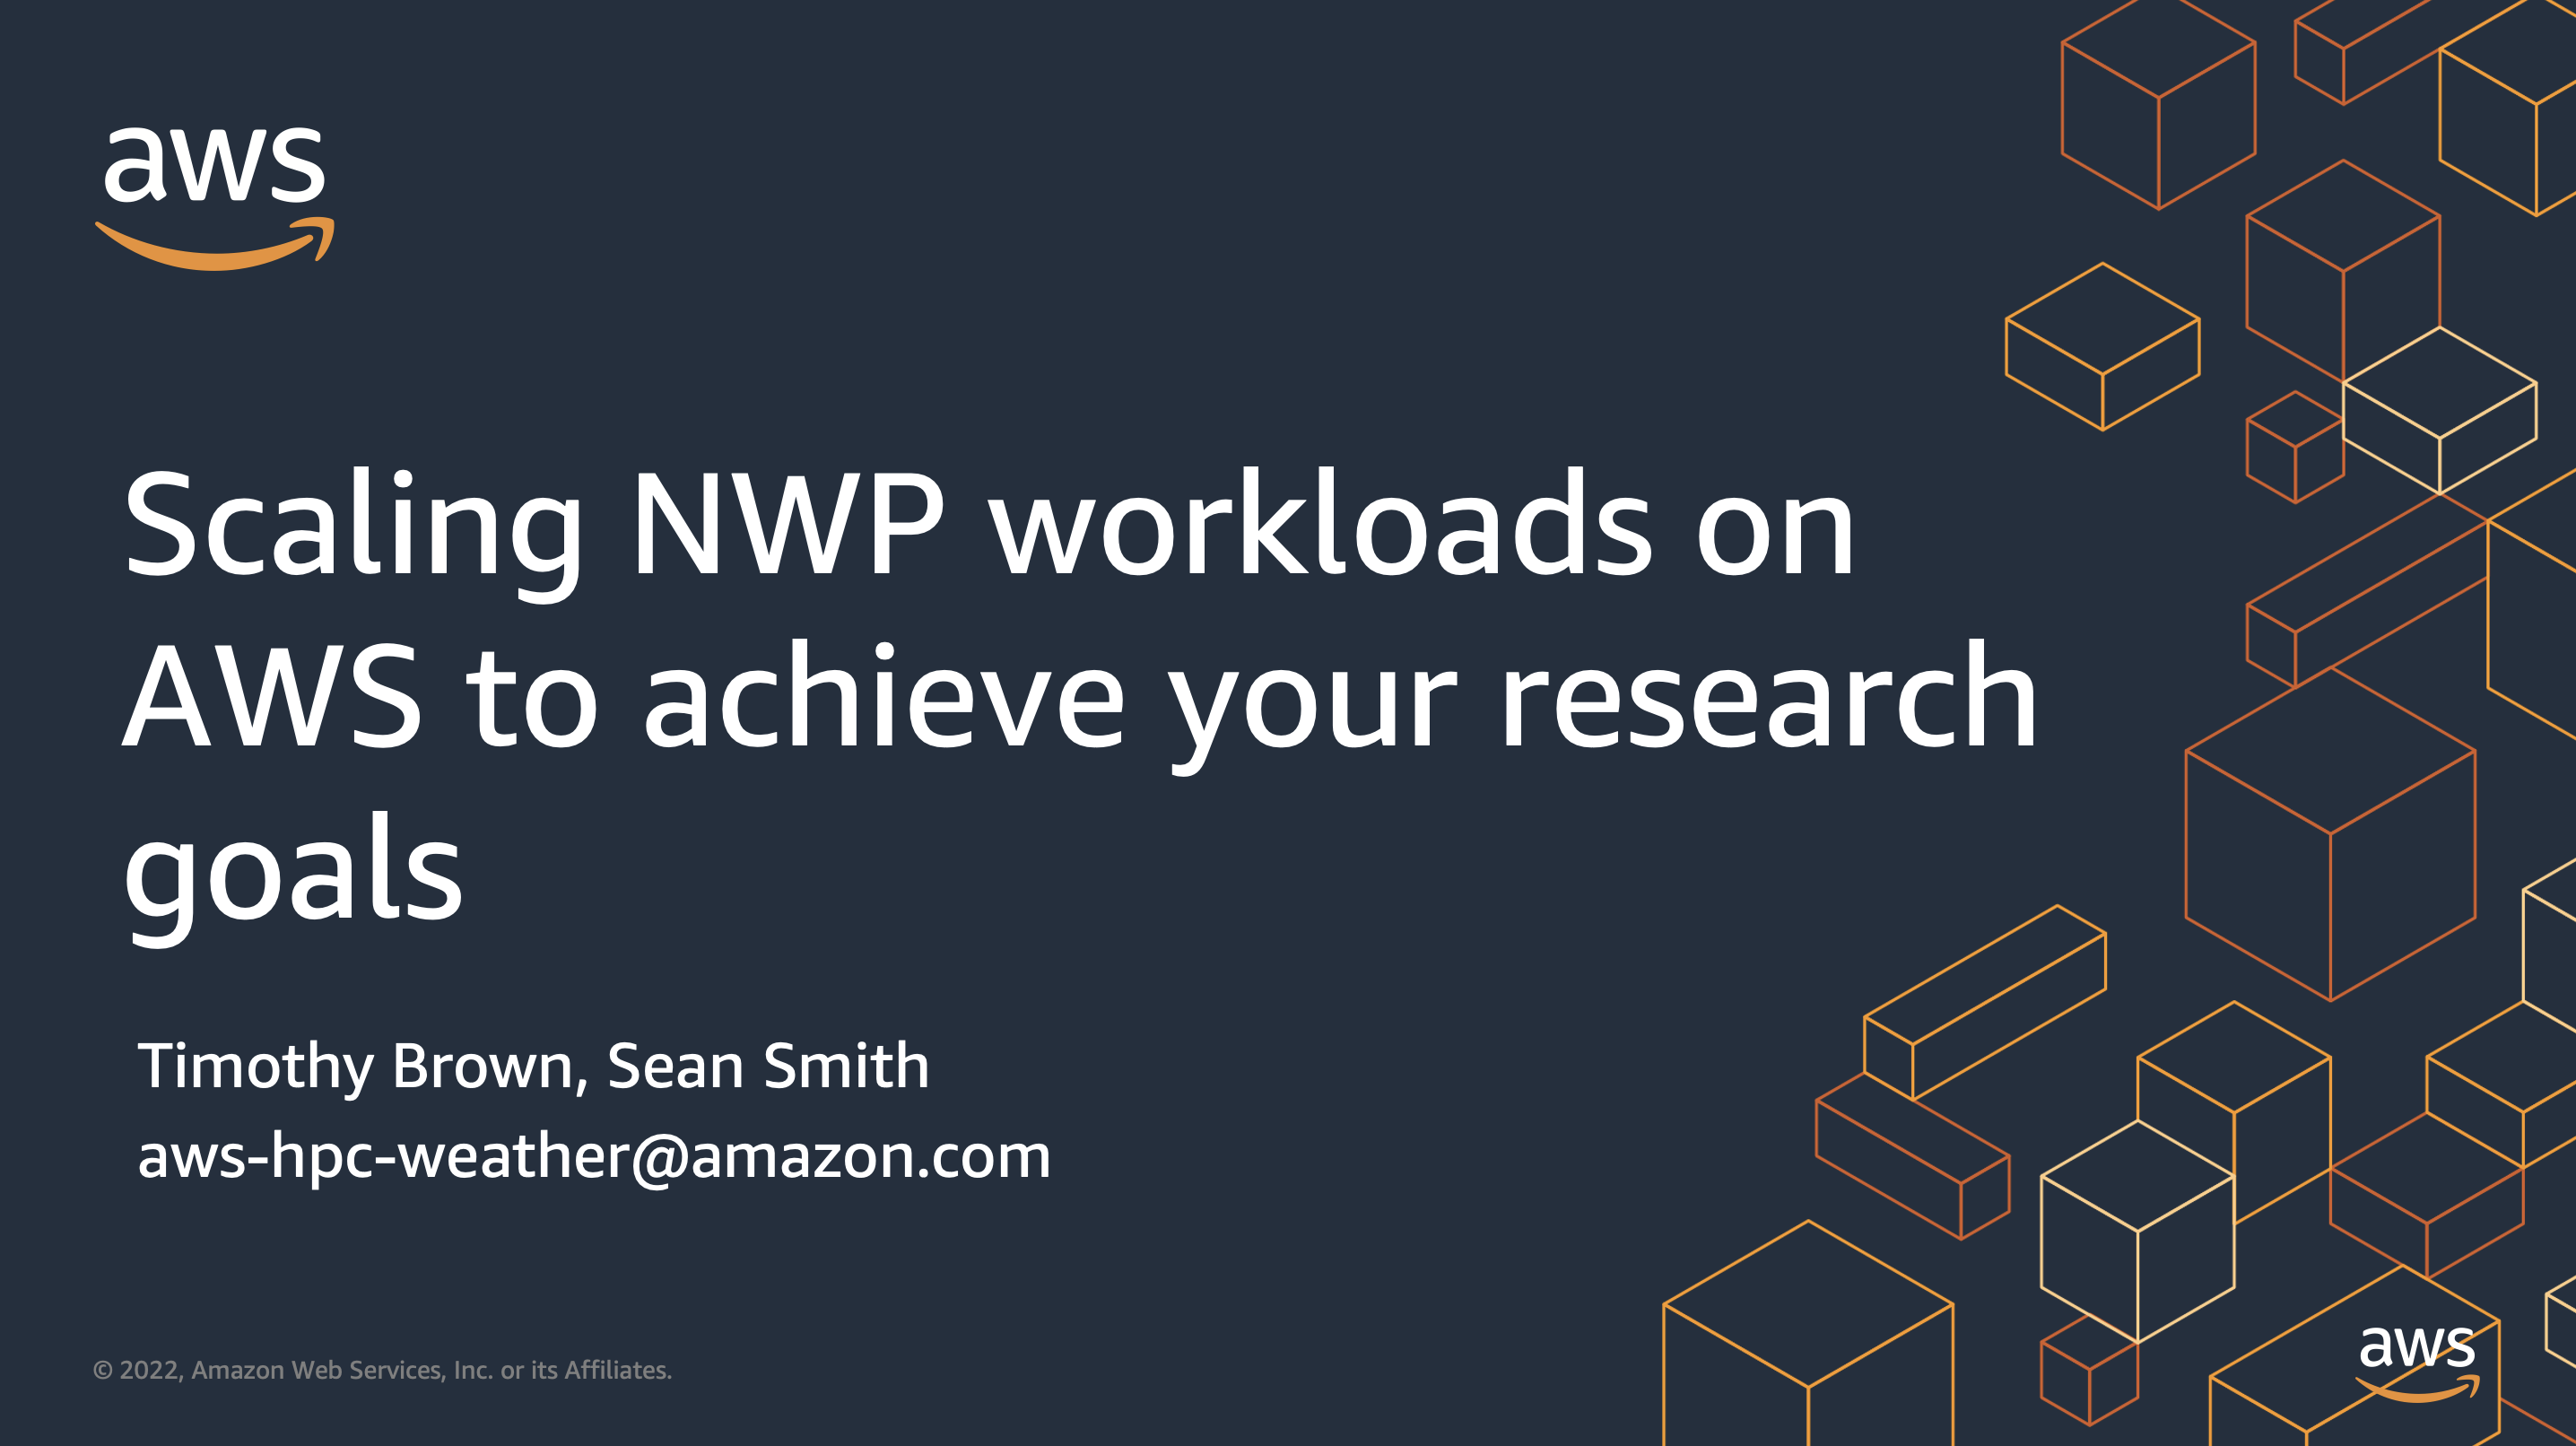 Scaling NWP workloads on AWS NZRSE Talk